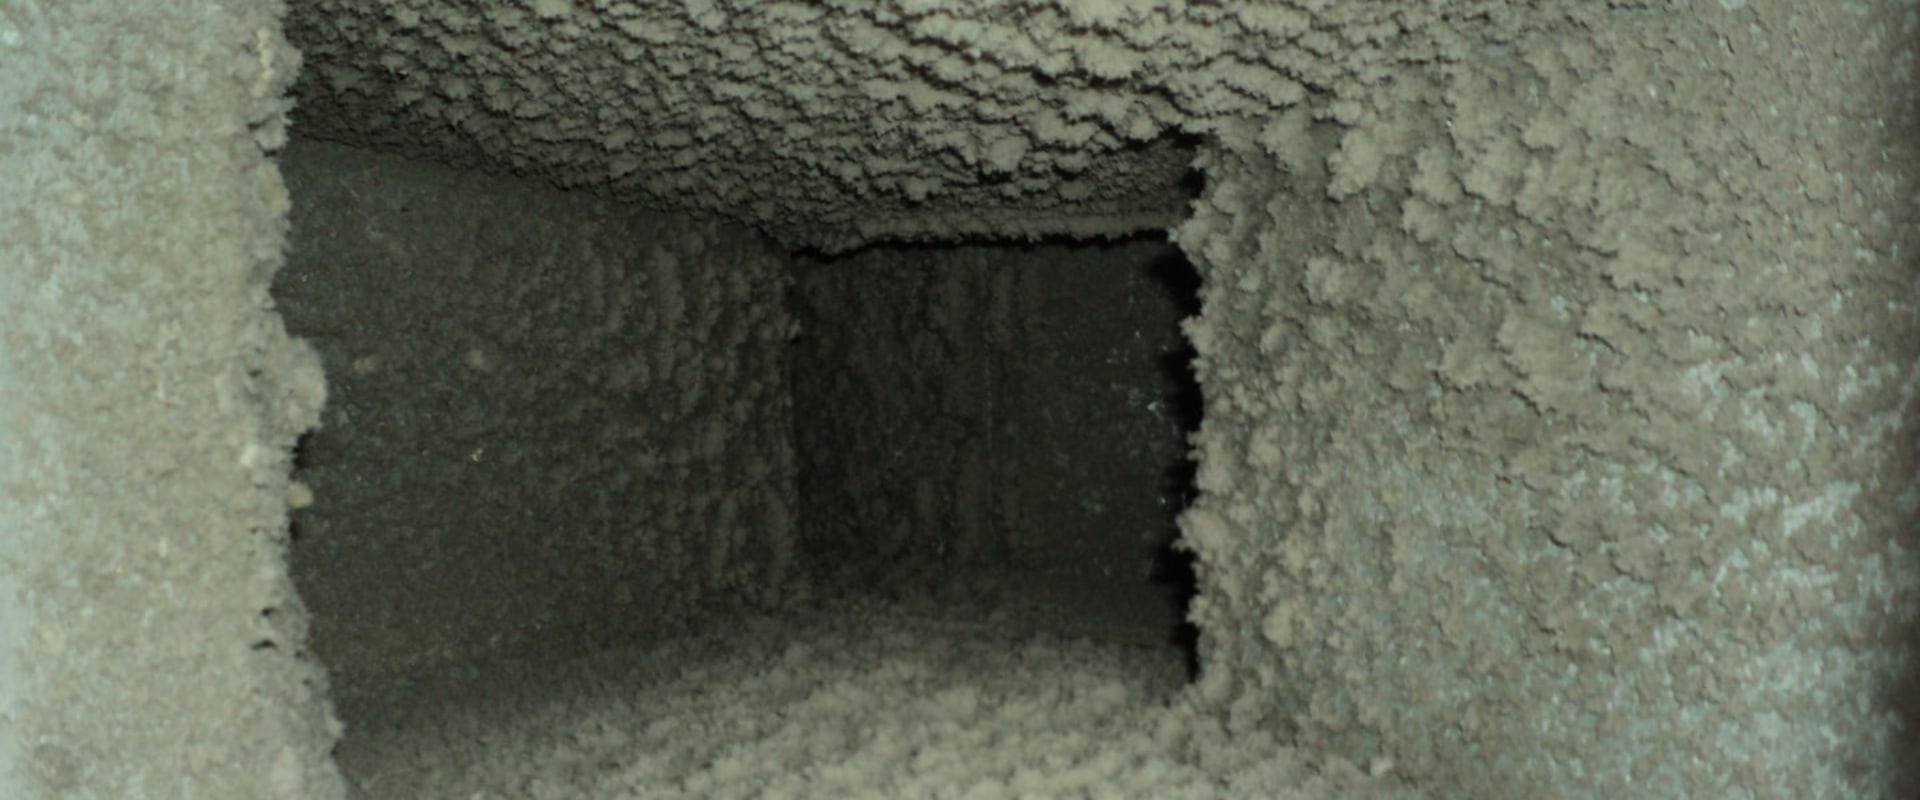 Discounts for Vent Cleaning in Pompano Beach, FL - Get the Best Deals Now!